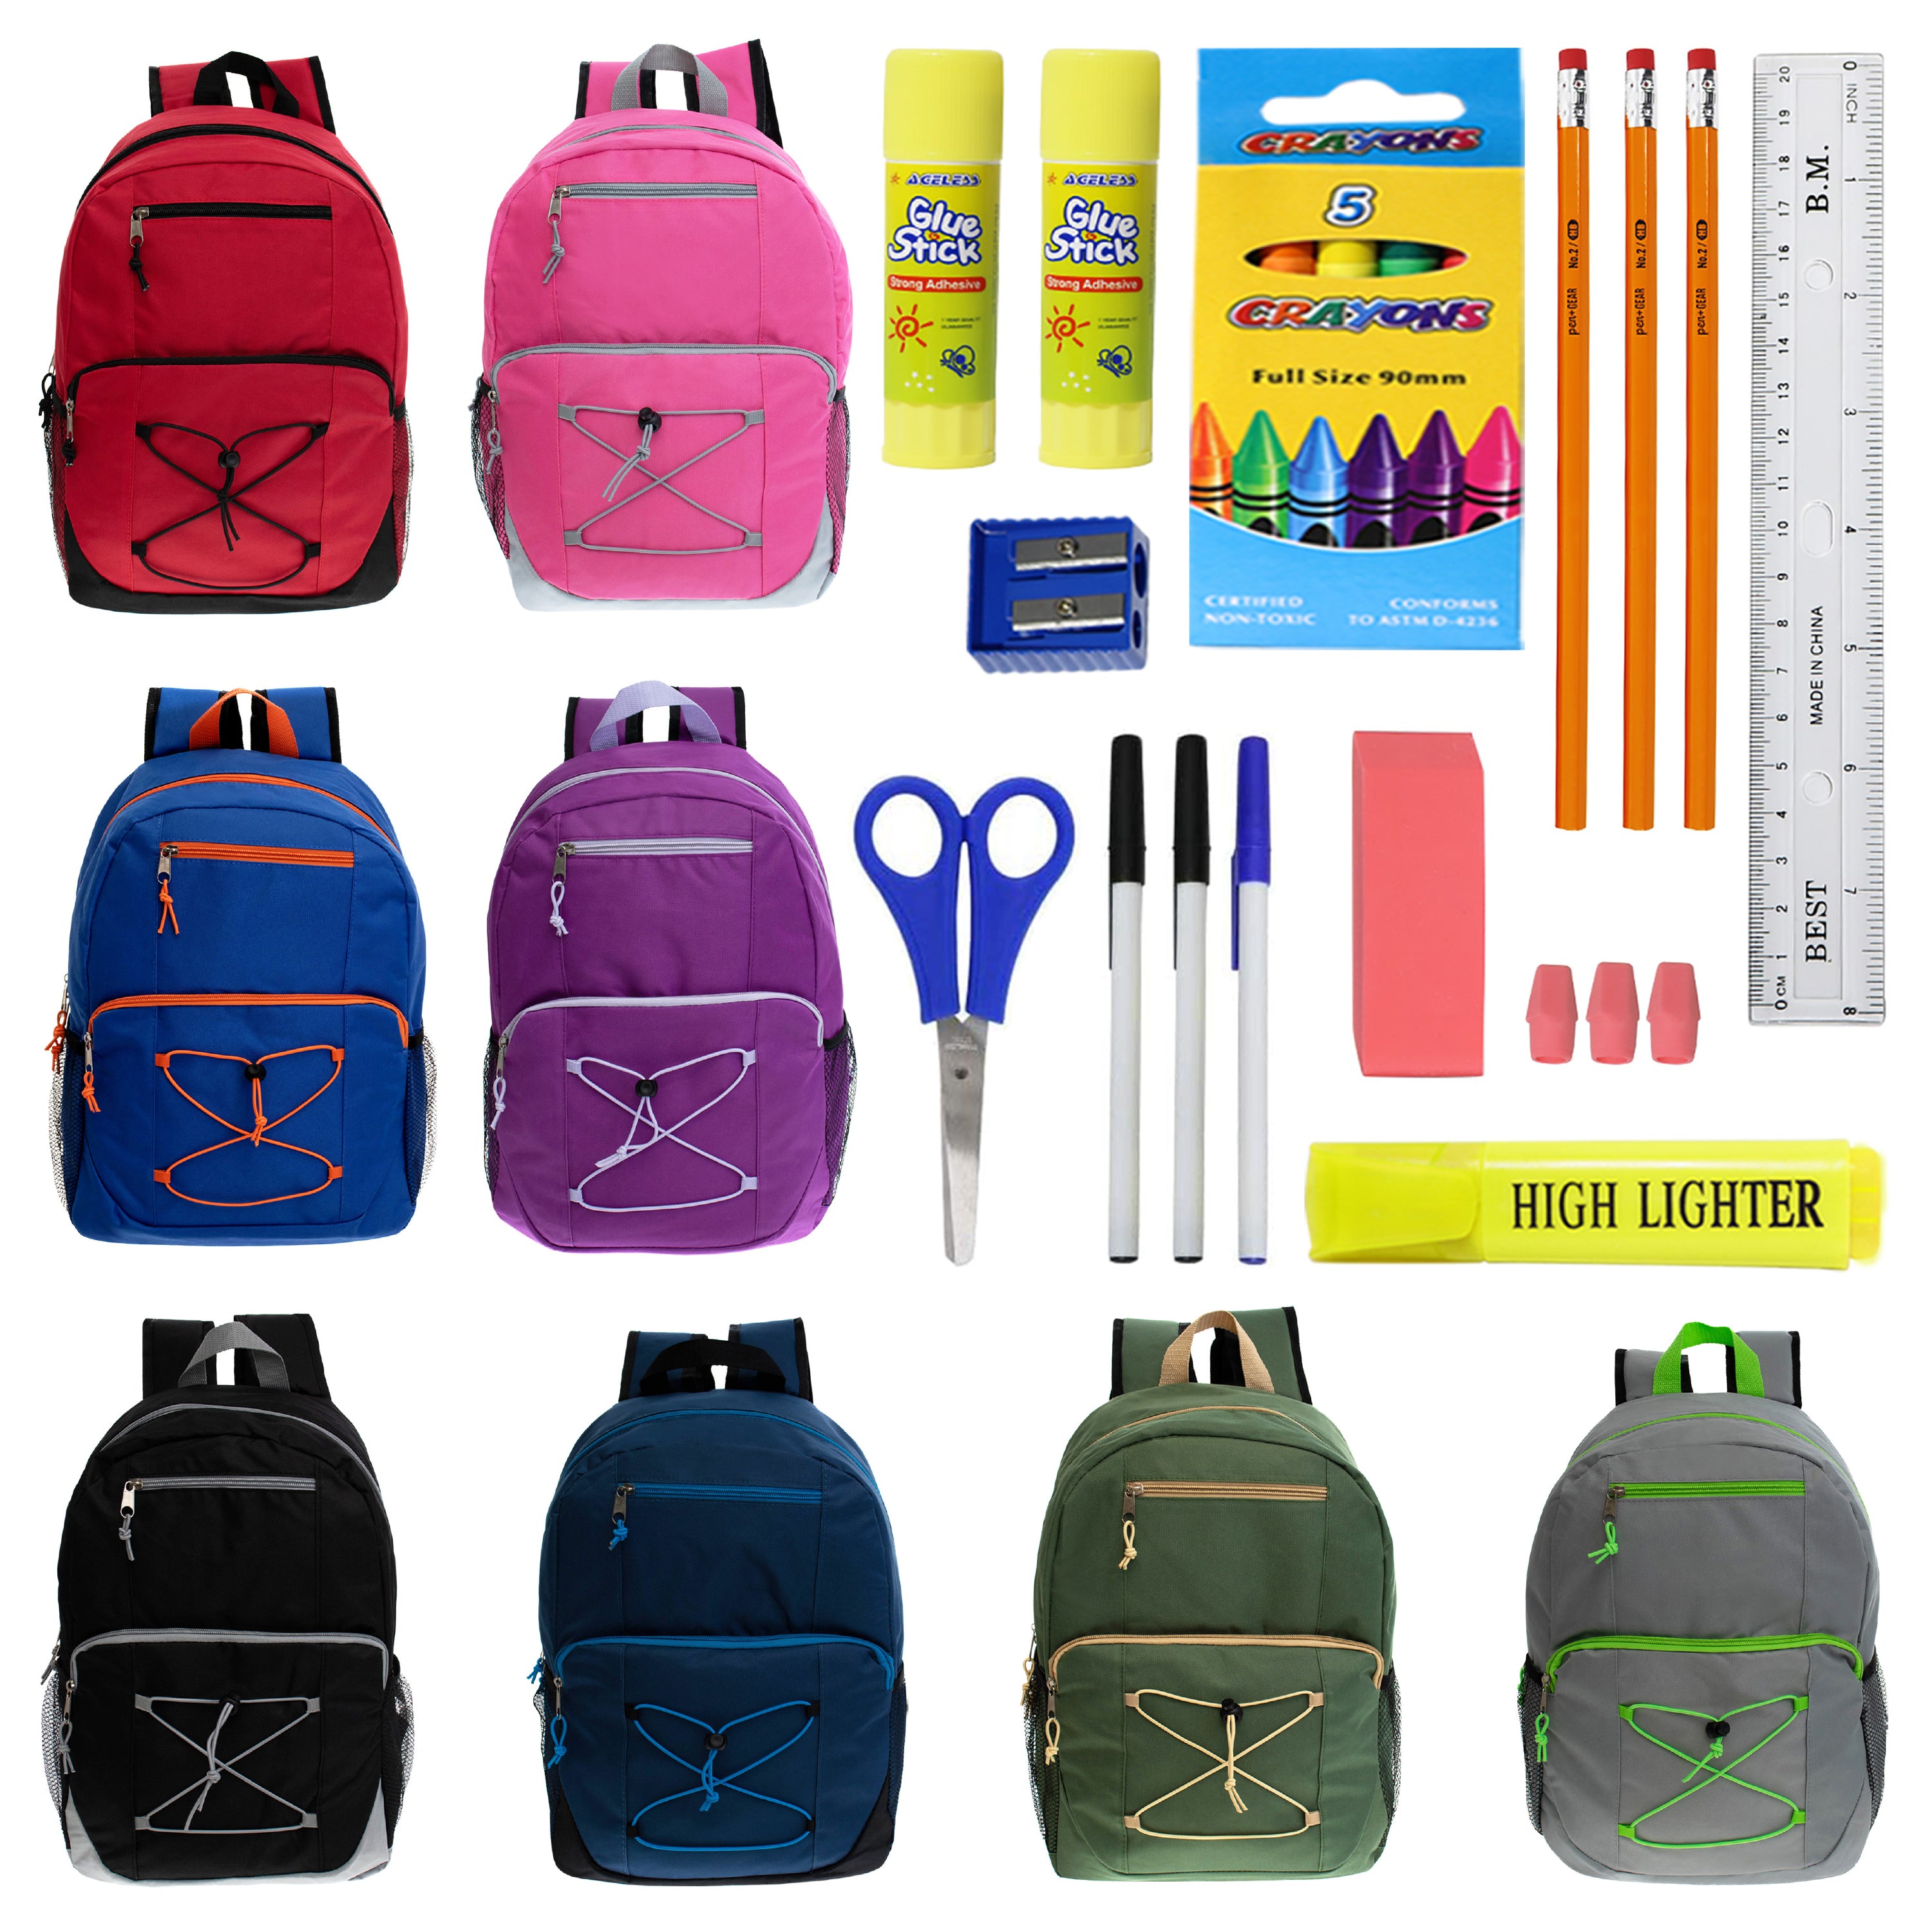 12 Bungee Style 17" Wholesale Backpacks in Assorted Colors & 12 Bulk School Supply Kits of Your Choice